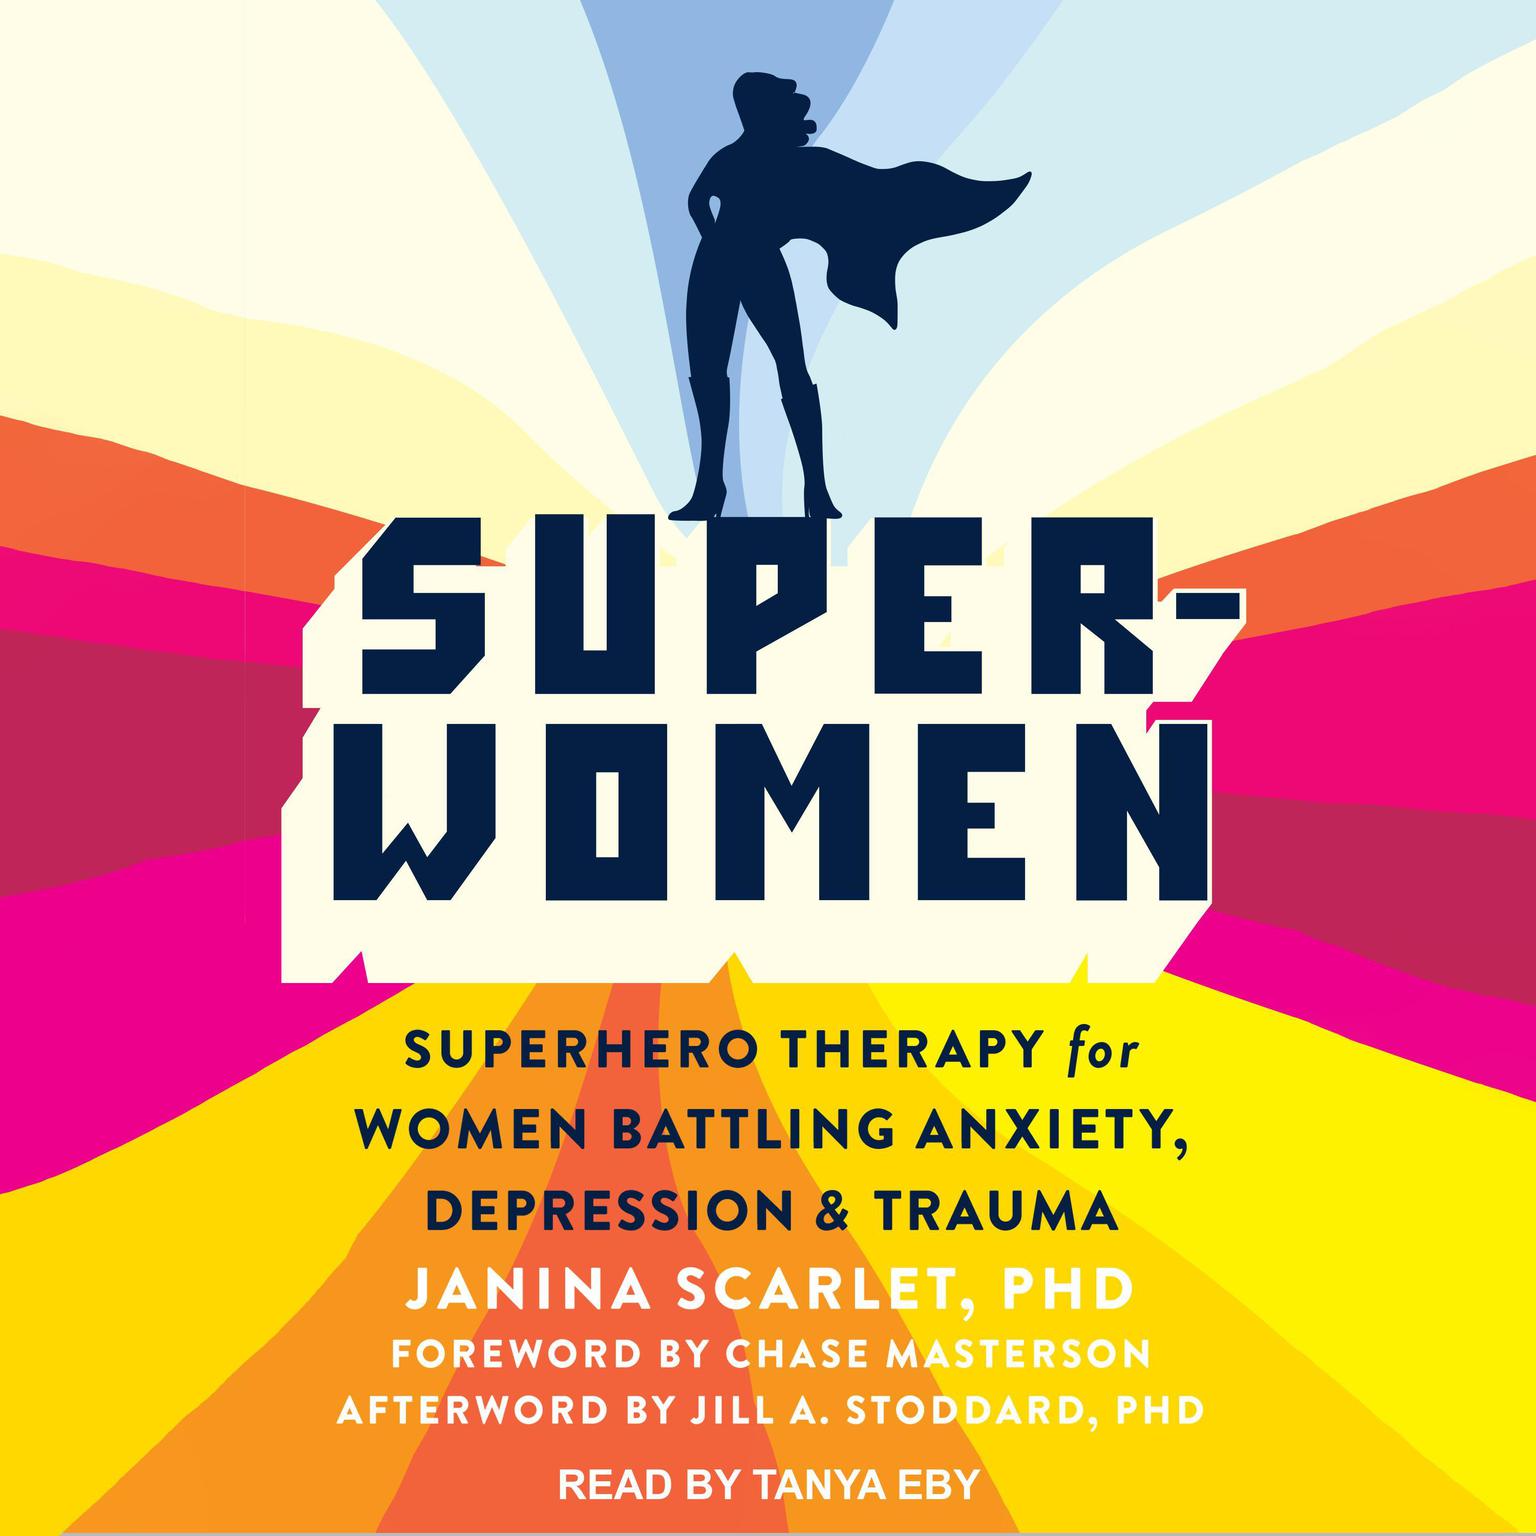 Super-Women: Superhero Therapy for Women Battling Anxiety, Depression, and Trauma Audiobook, by Janina Scarlet